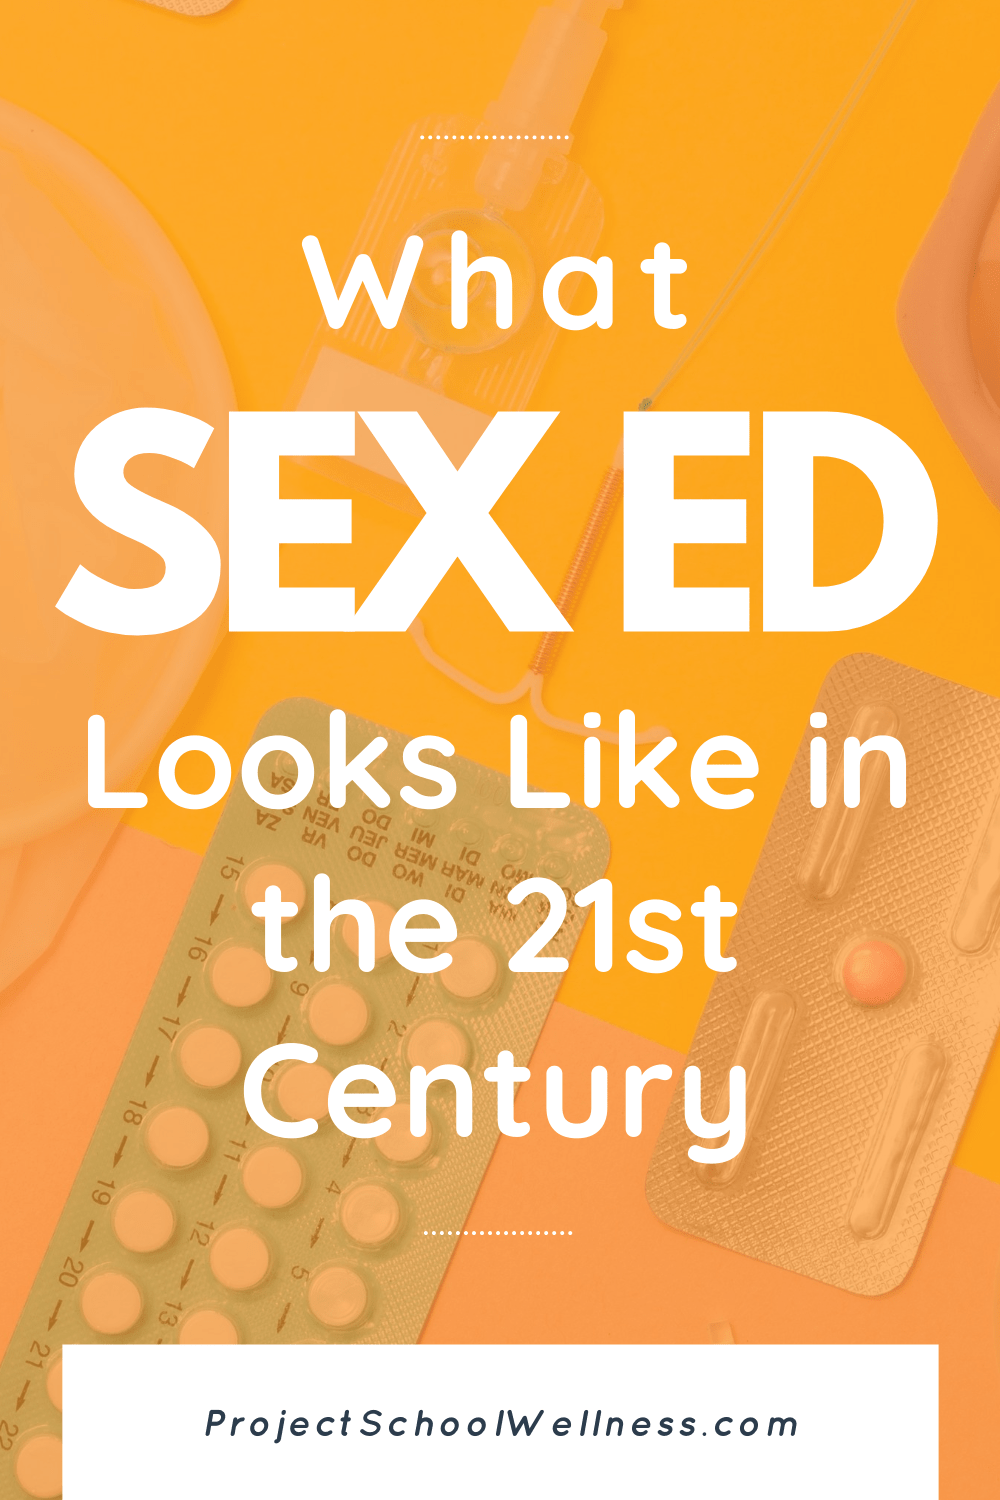 Sexual Health Education in the 21st Century - Five must have characteristics of any comprehensive sex ed program and curriculum